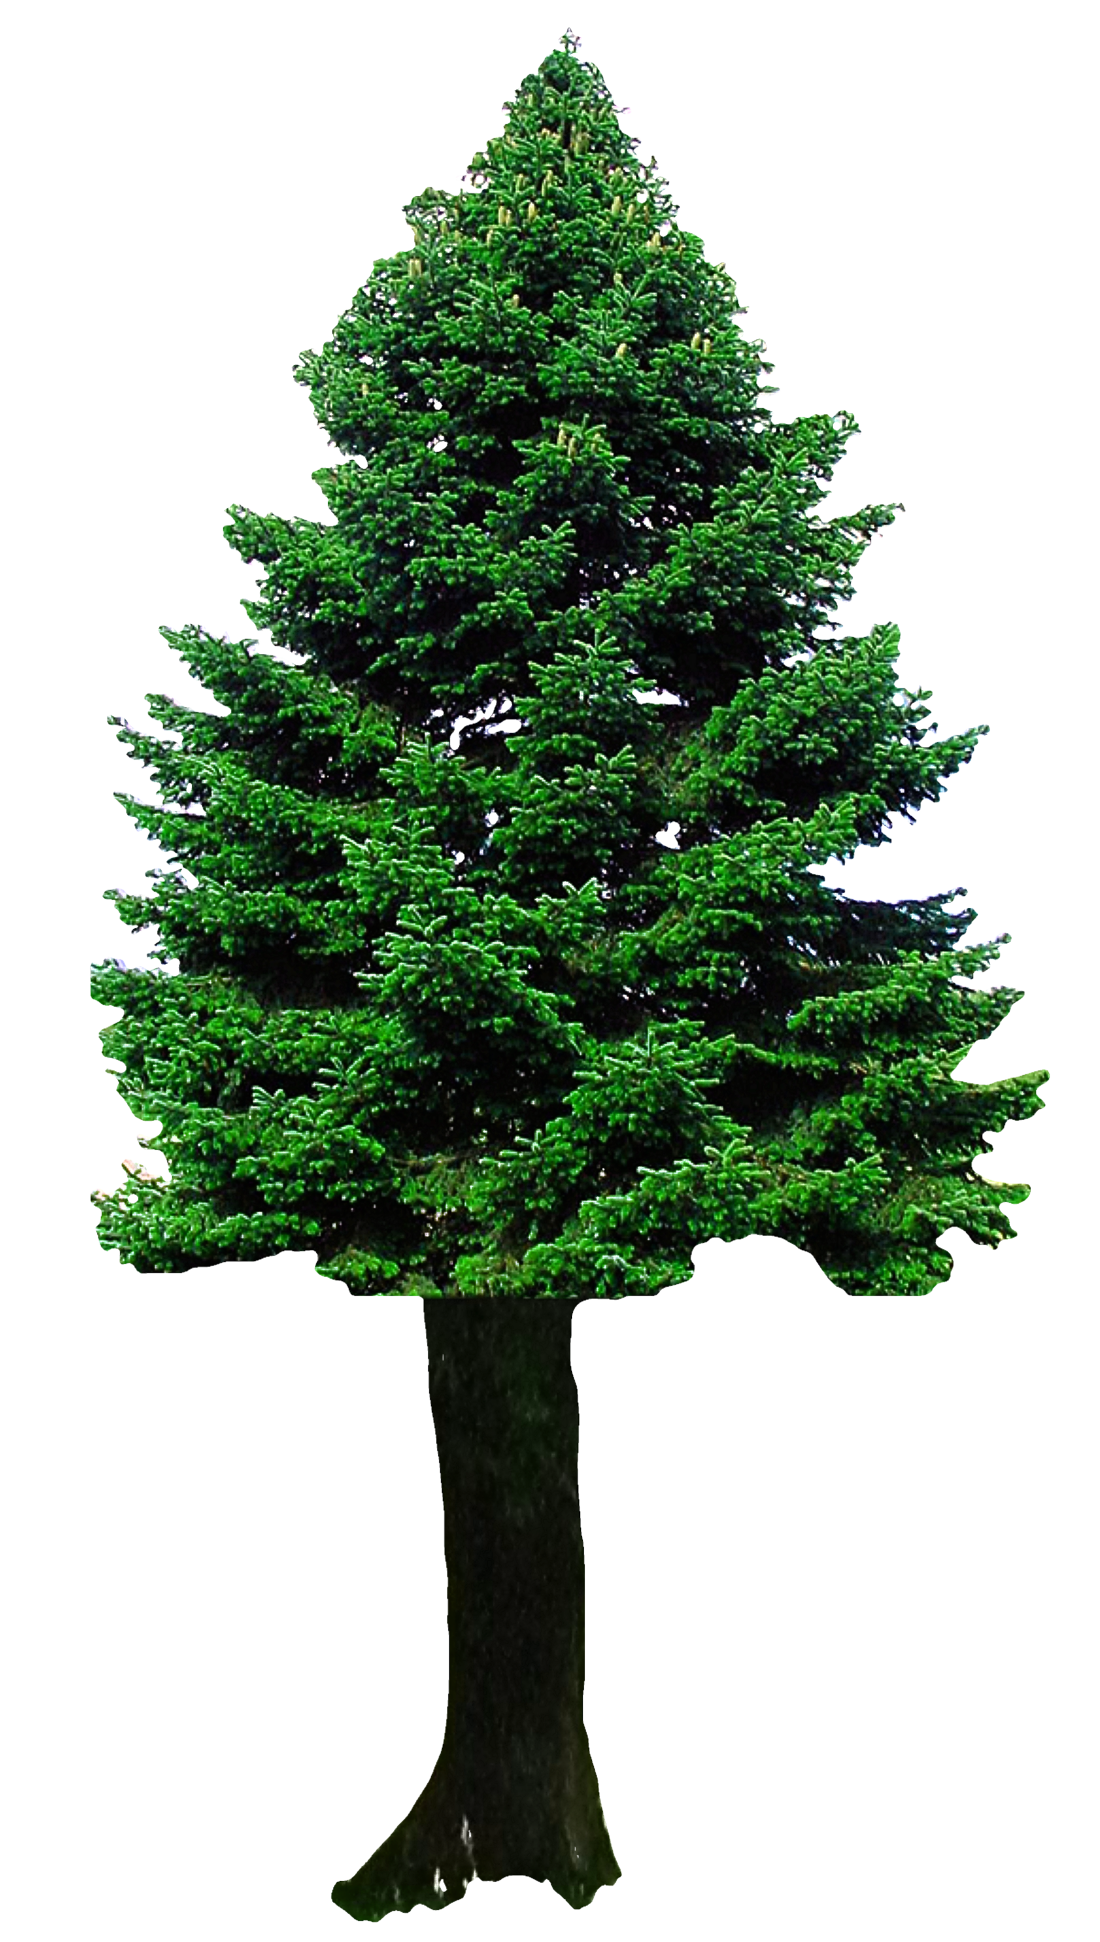 Green Christmas Tree PNG Image Background